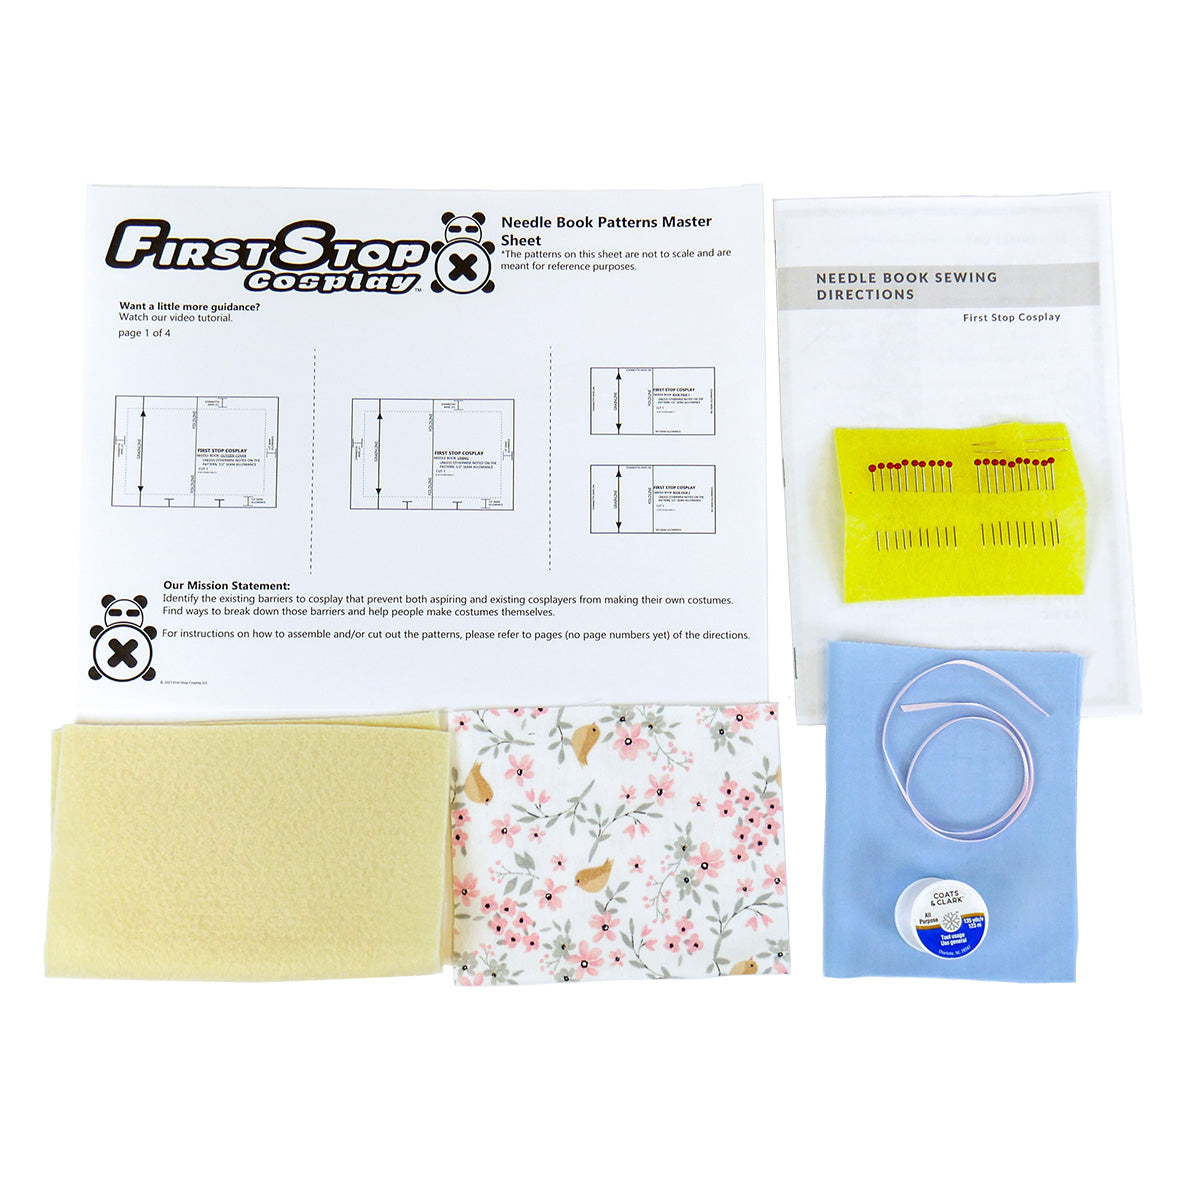 An image of the materials, sewing directions booklet, and patterns master sheet document included in a Needle Book Kit. The materials needed in order to construct a floral patterned Needle Book: (1) a yellow felt rectangle with 20 glass head pins and two sewing needles; (2) yellow felt rectangles; (3) a rectangular blue piece of fabric; (4) a rectangular piece of fabric with a pink floral pattern; (5) light pink ribbon; and (6) and spool of thread. Note that colors will vary per package.